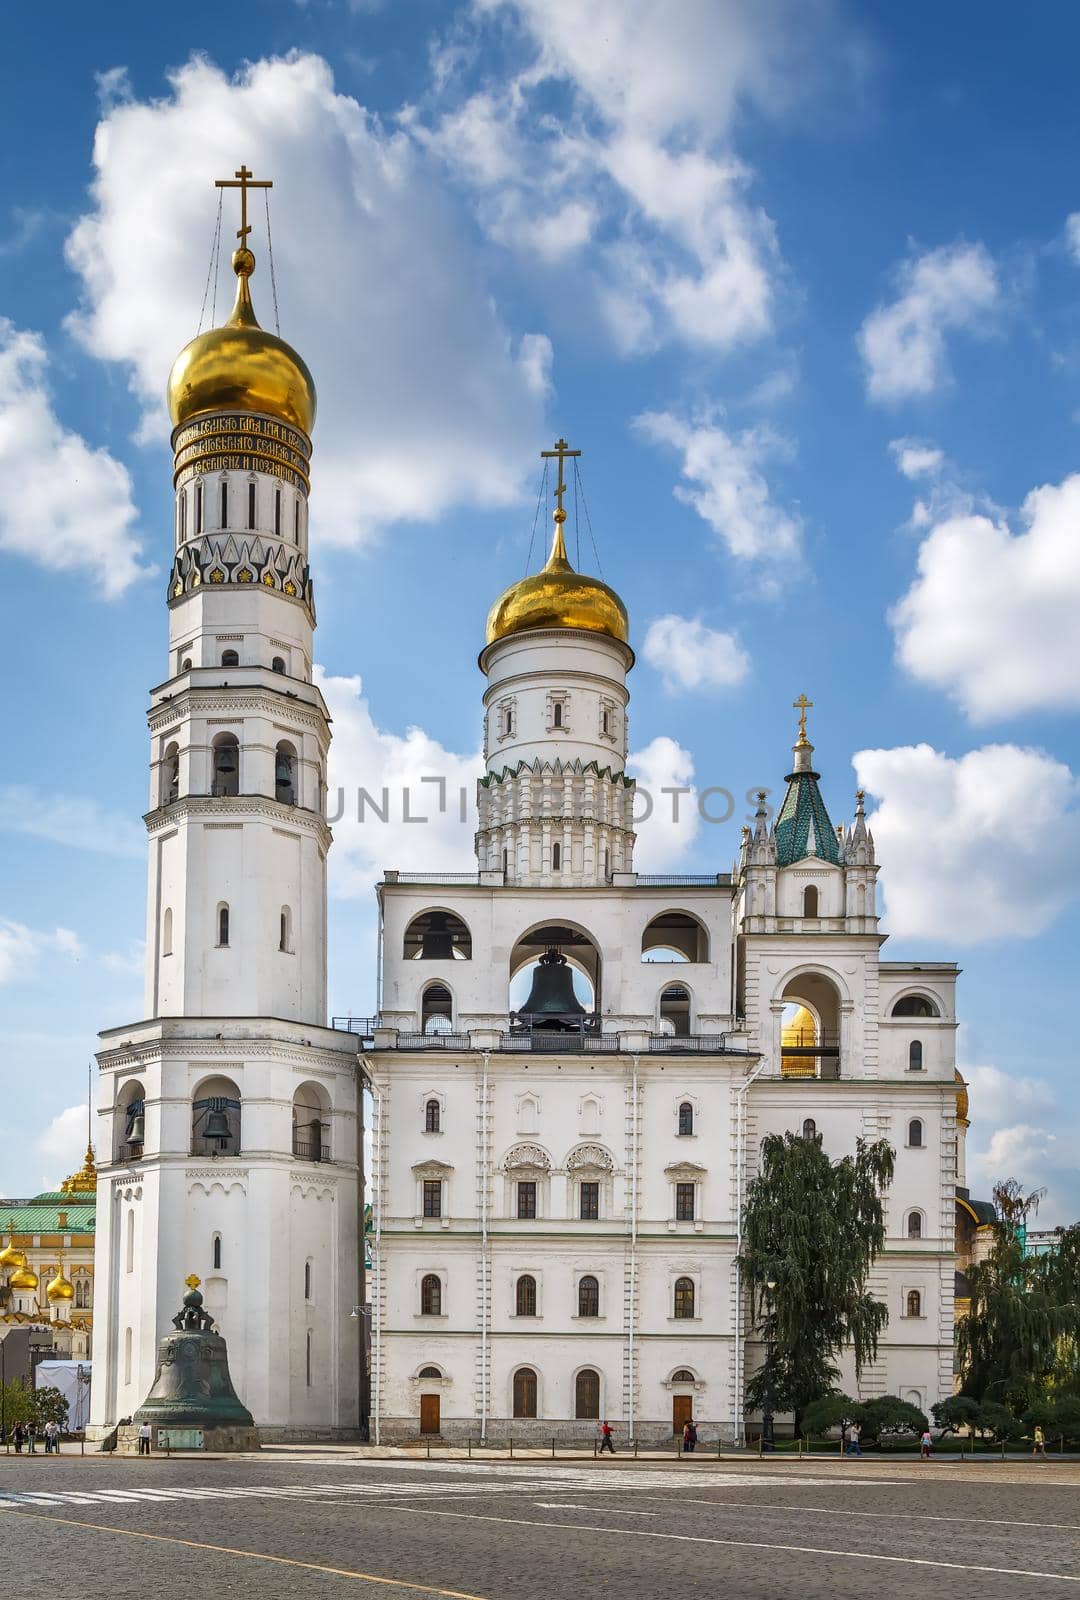 Ivan the Great Bell Tower is a church tower inside the Moscow Kremlin comple, Russiax